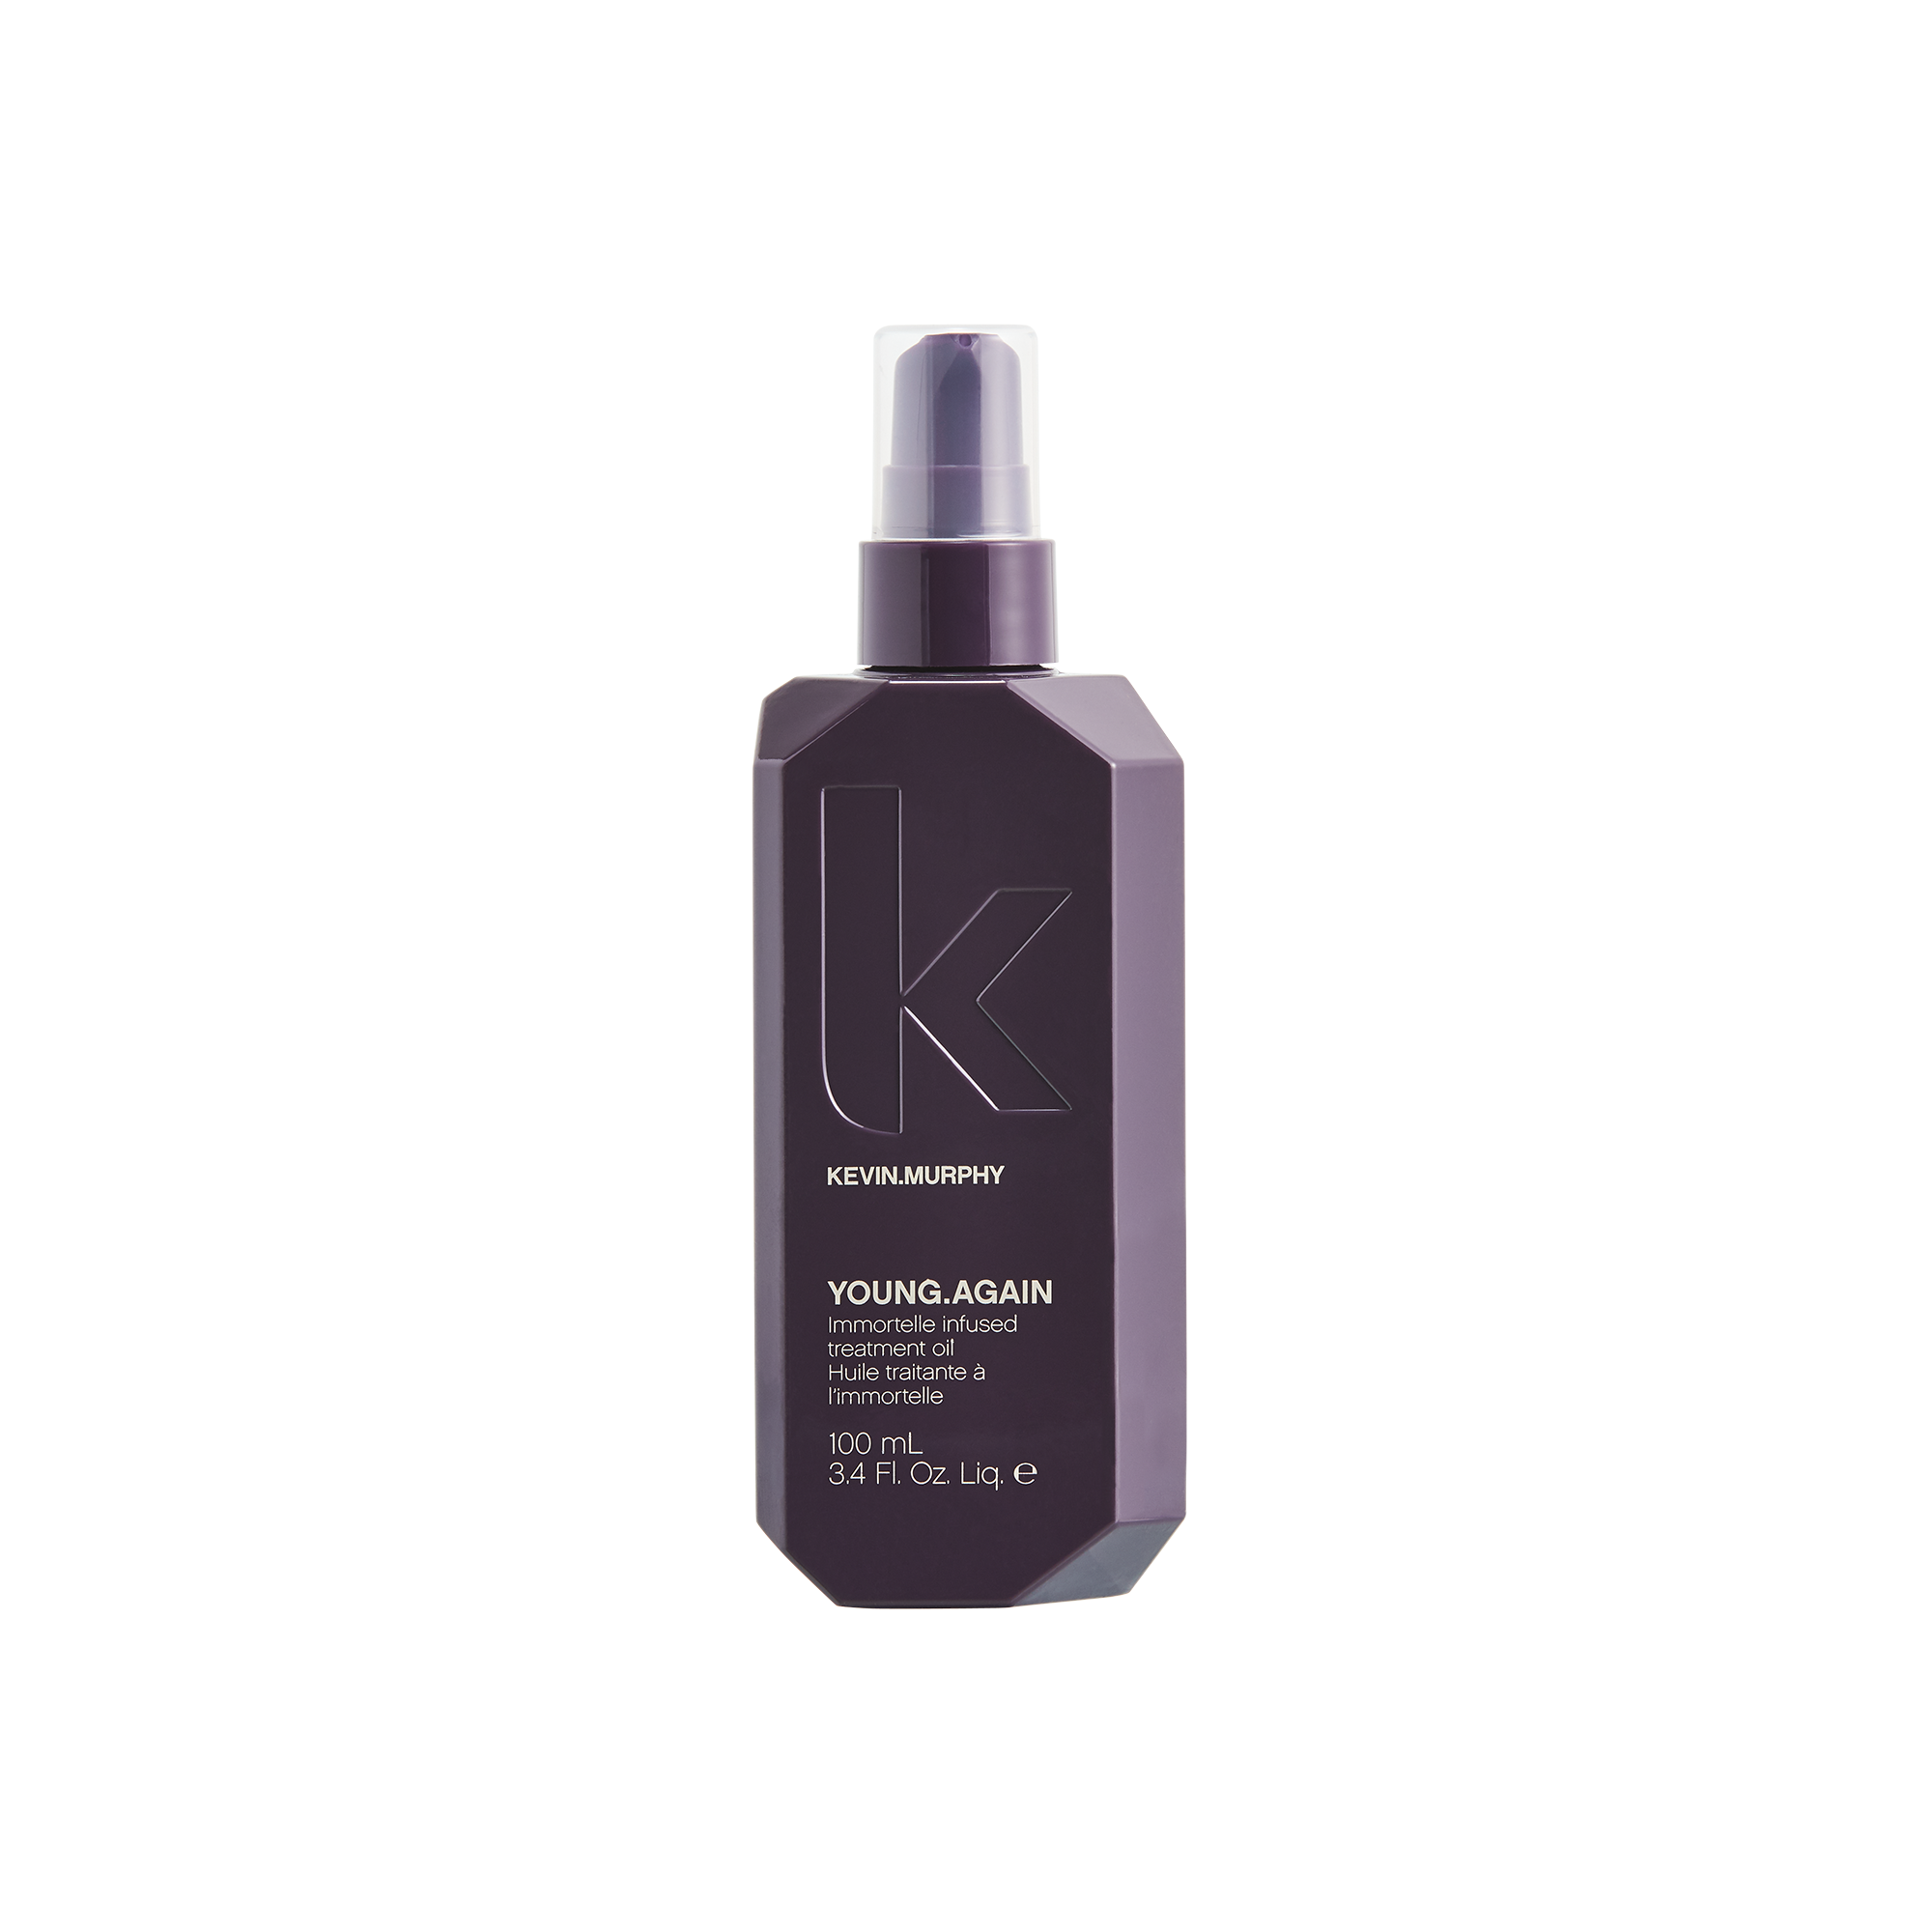 Kevin Murphy - Young.Again 100 ml.